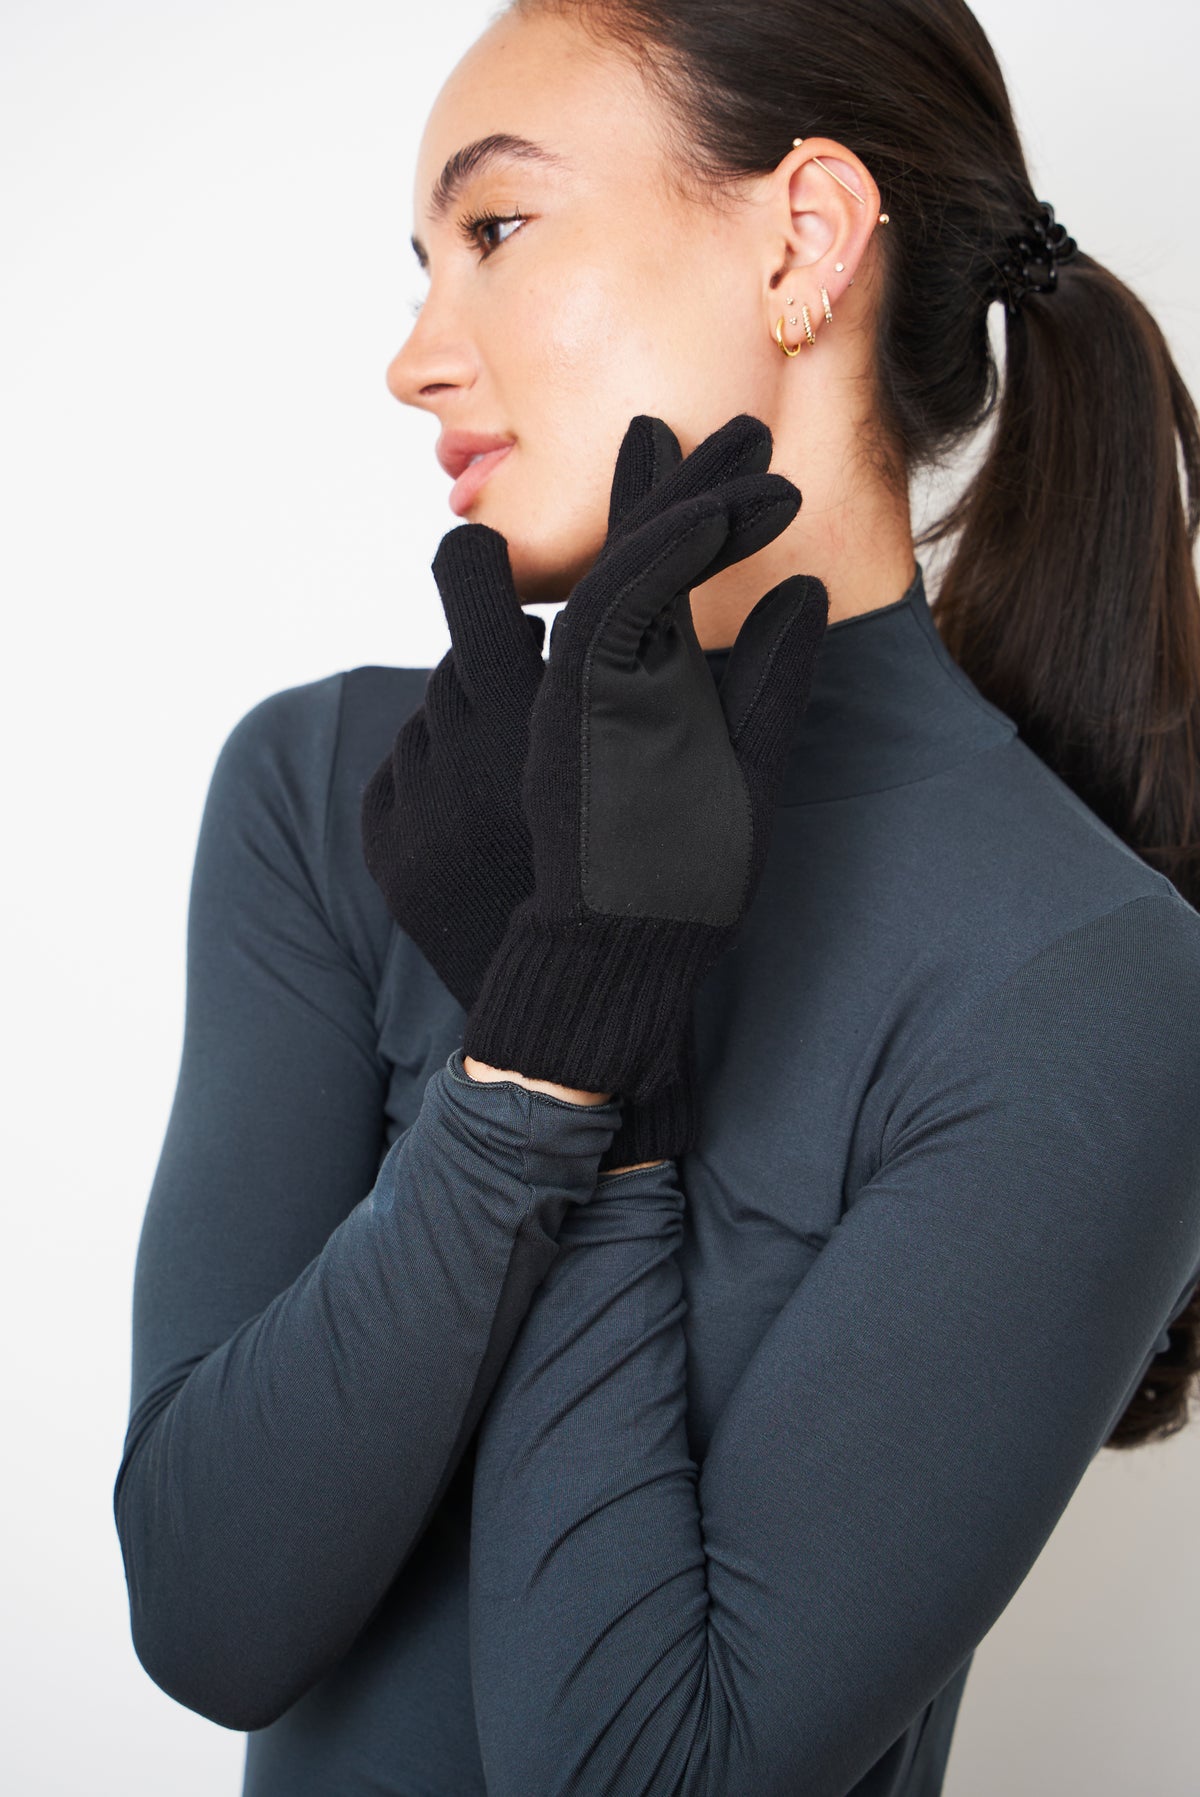 Extra Fine Merino Wool Gloves with Self-Heating Liner and Palm Patch ...